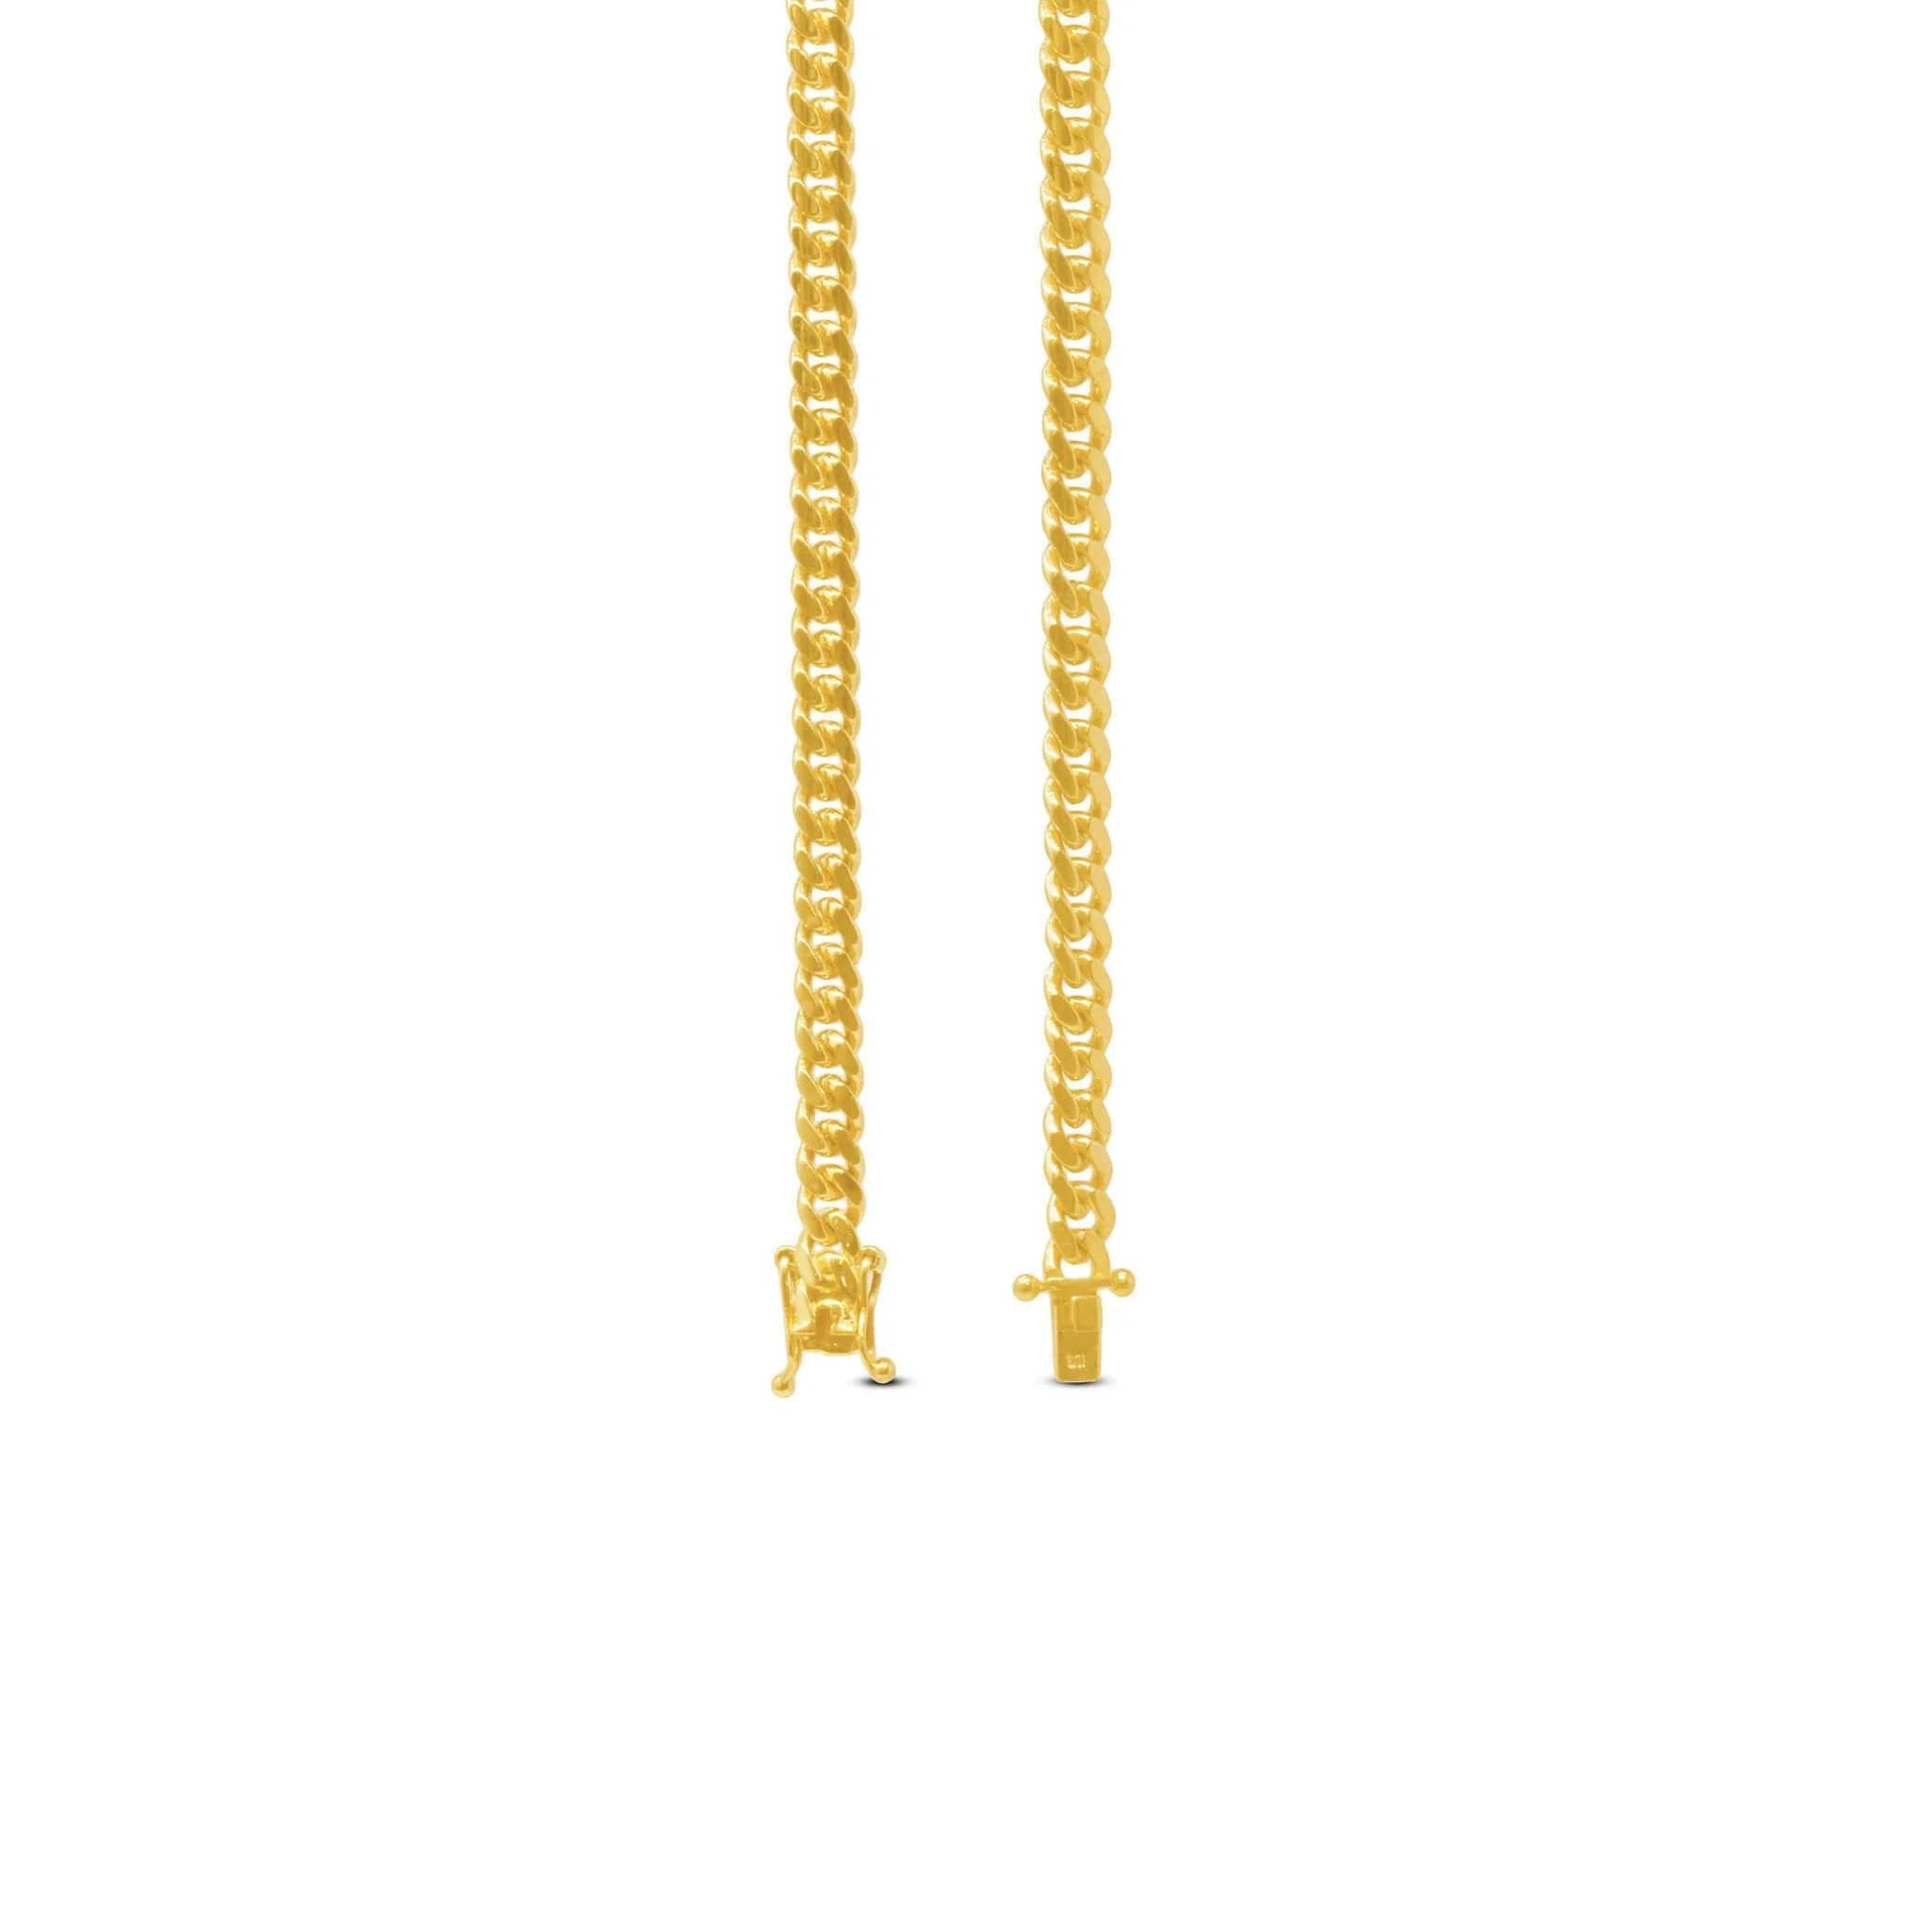 17mm Miami Cuban Link Bracelet in 14K Solid Yellow Gold - Vera Jewelry in Miami